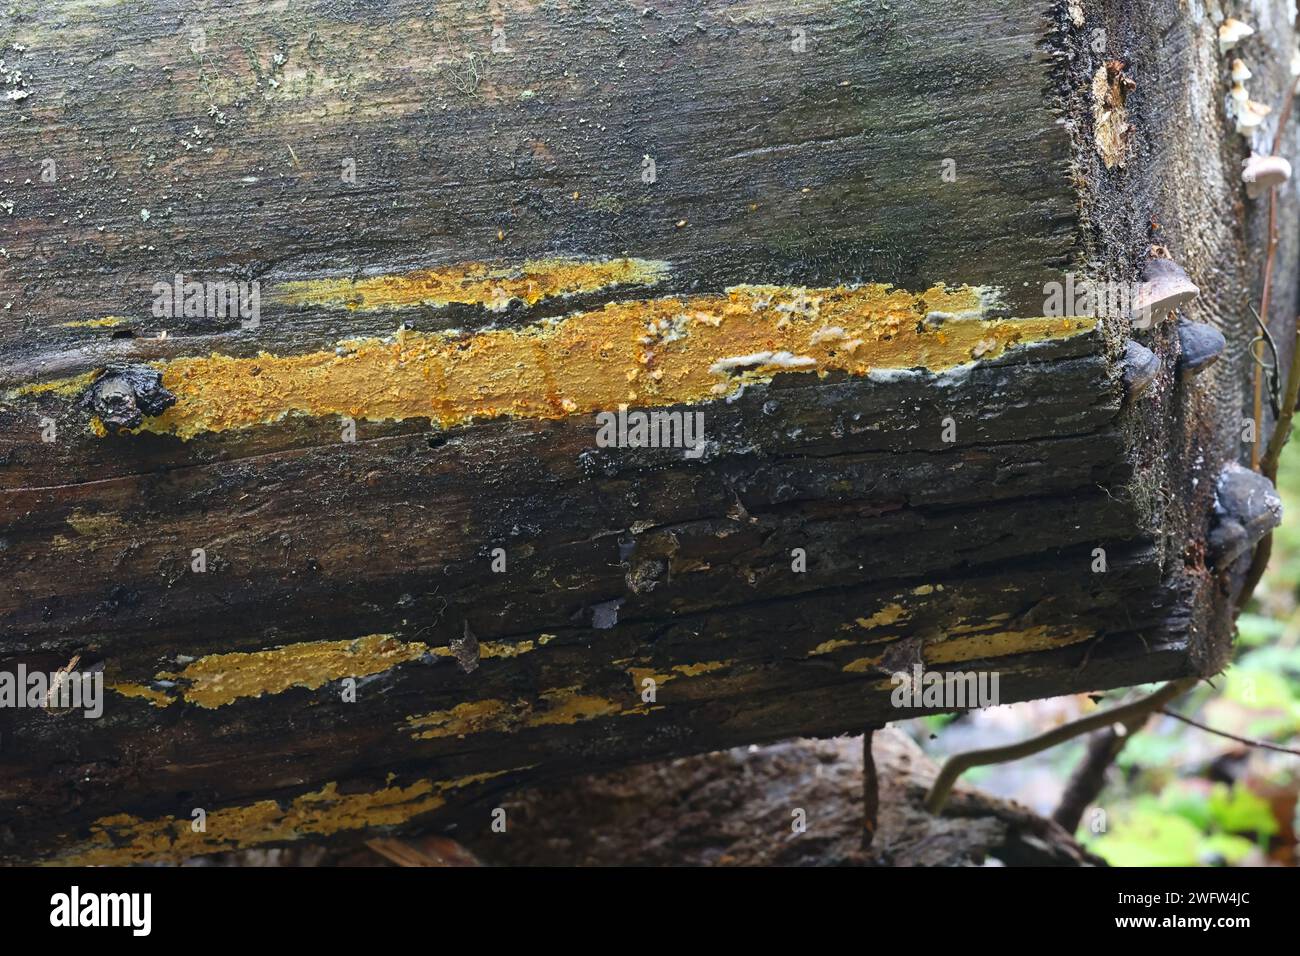 Crustoderma dryinum, a crust fungus from Finland, no common English name Stock Photo